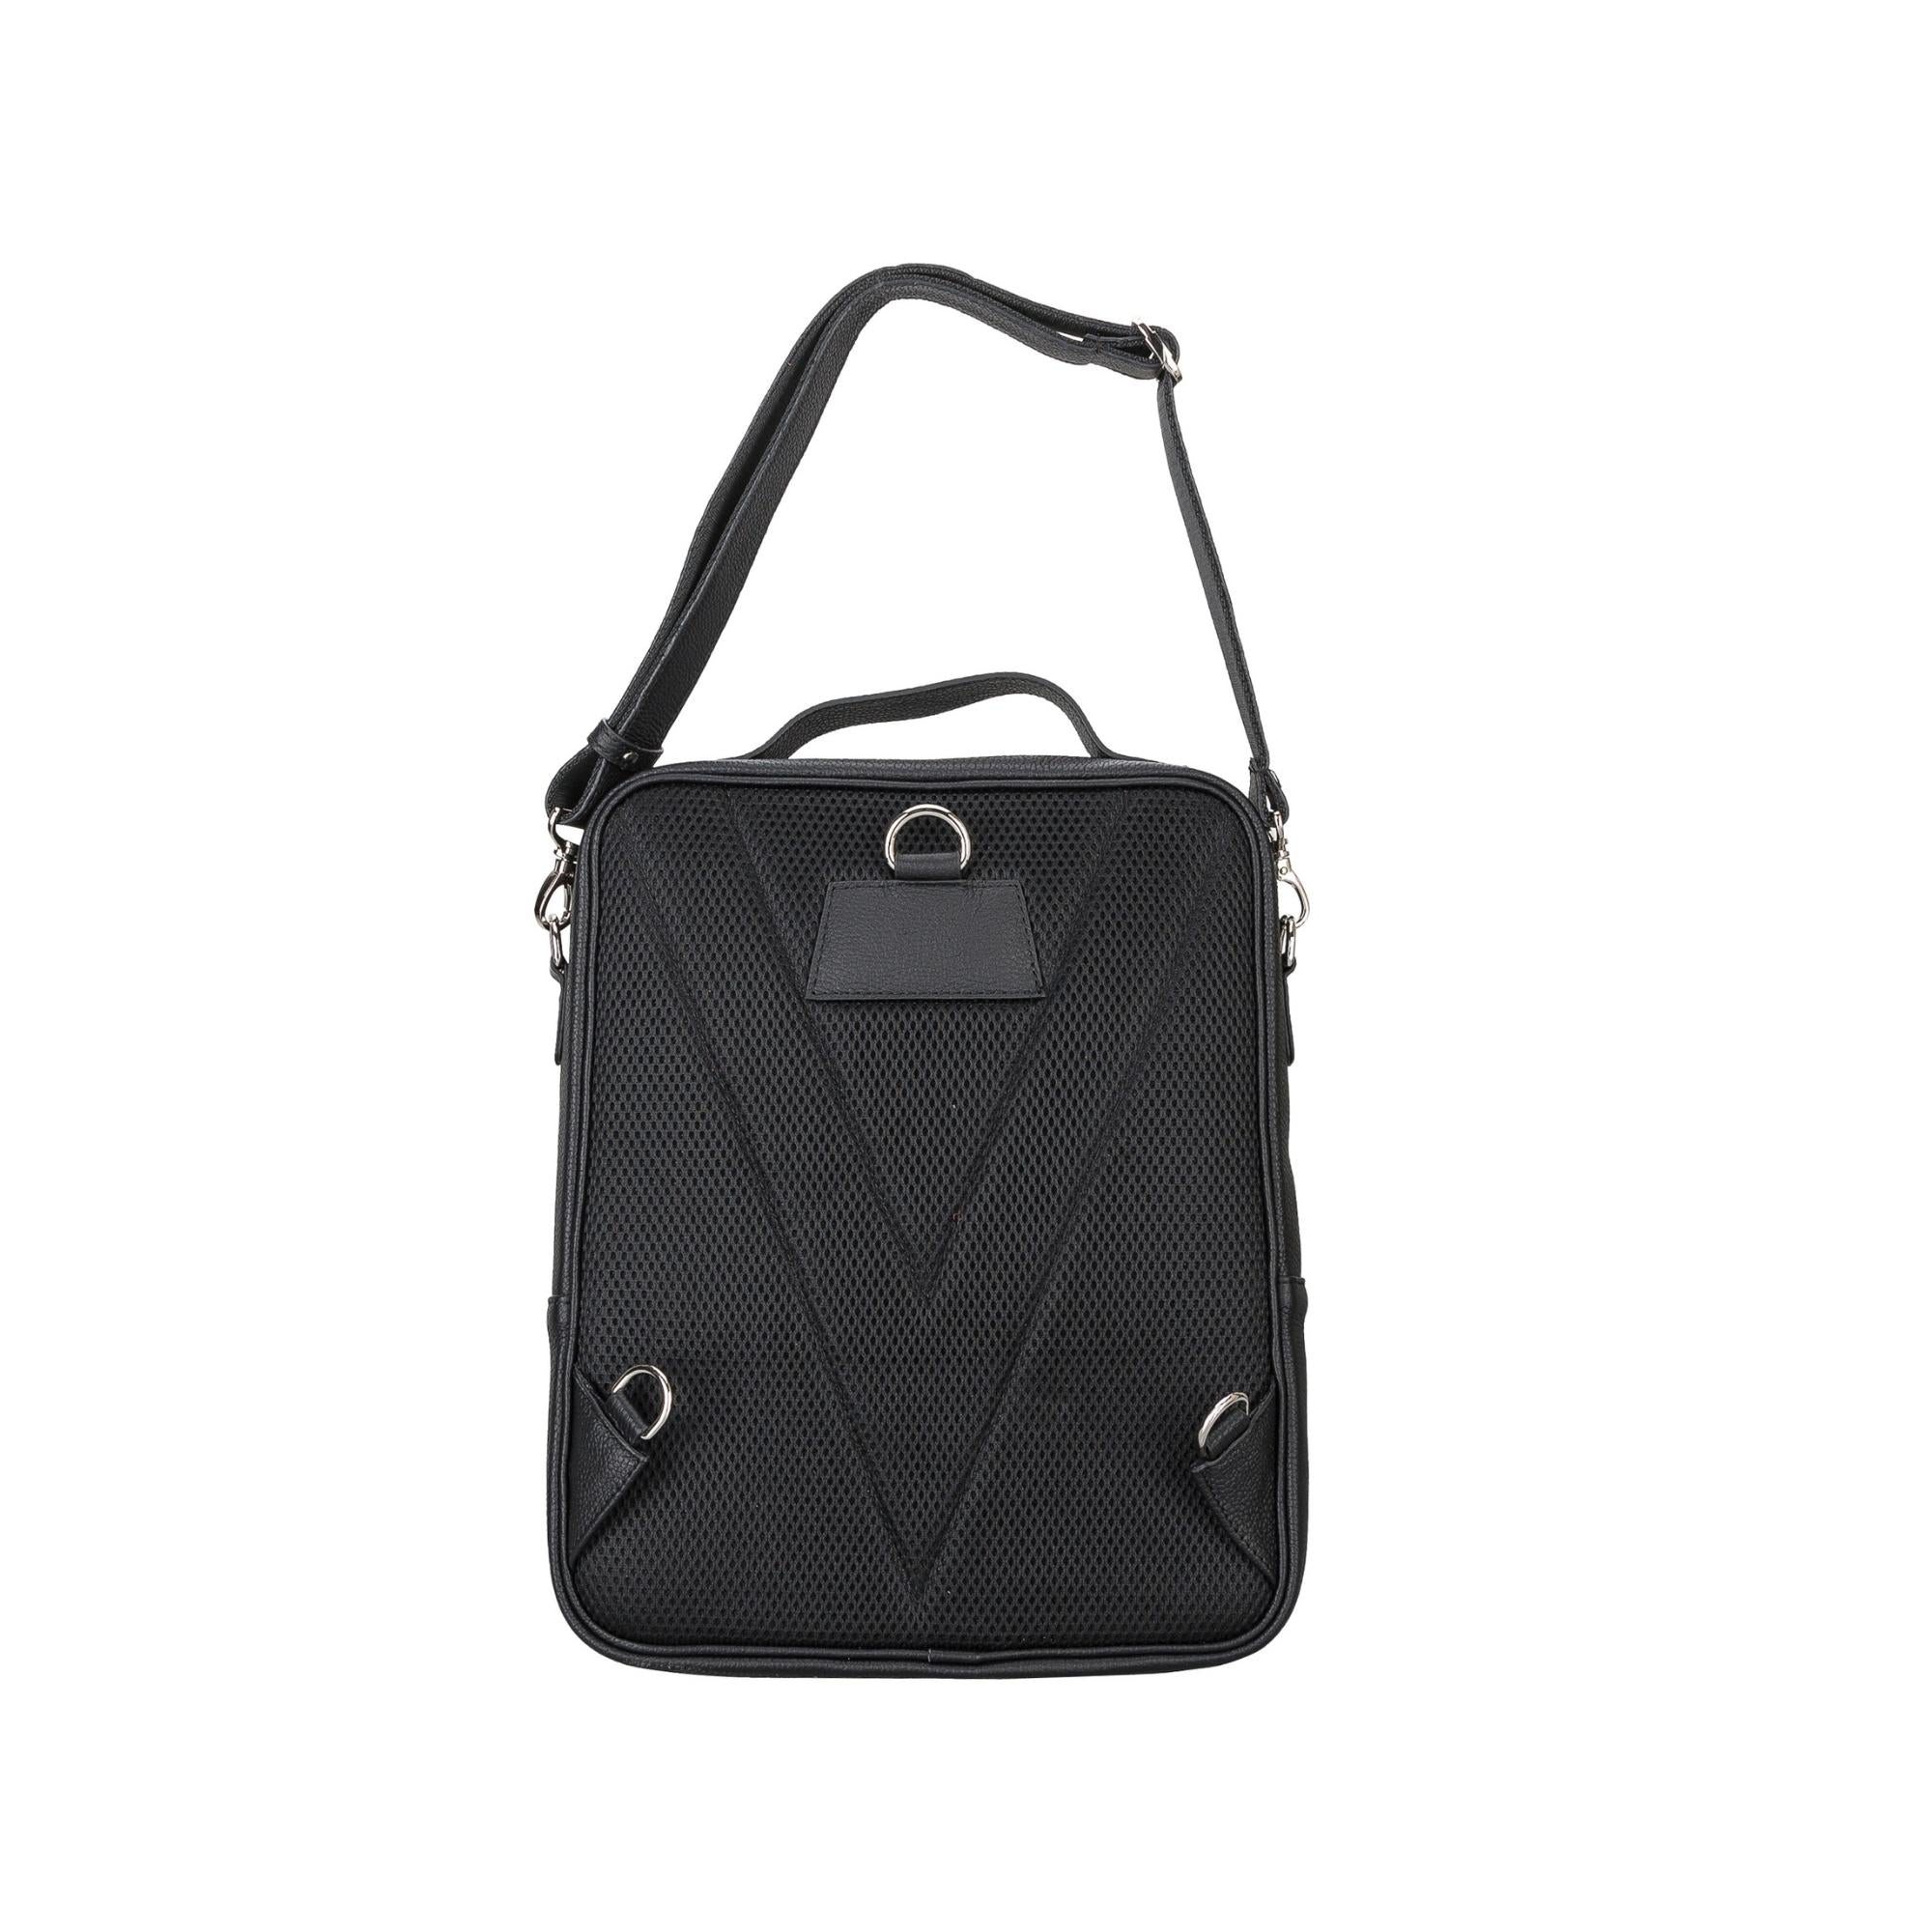 Harley-Davidson Leather Tote Bags for Women